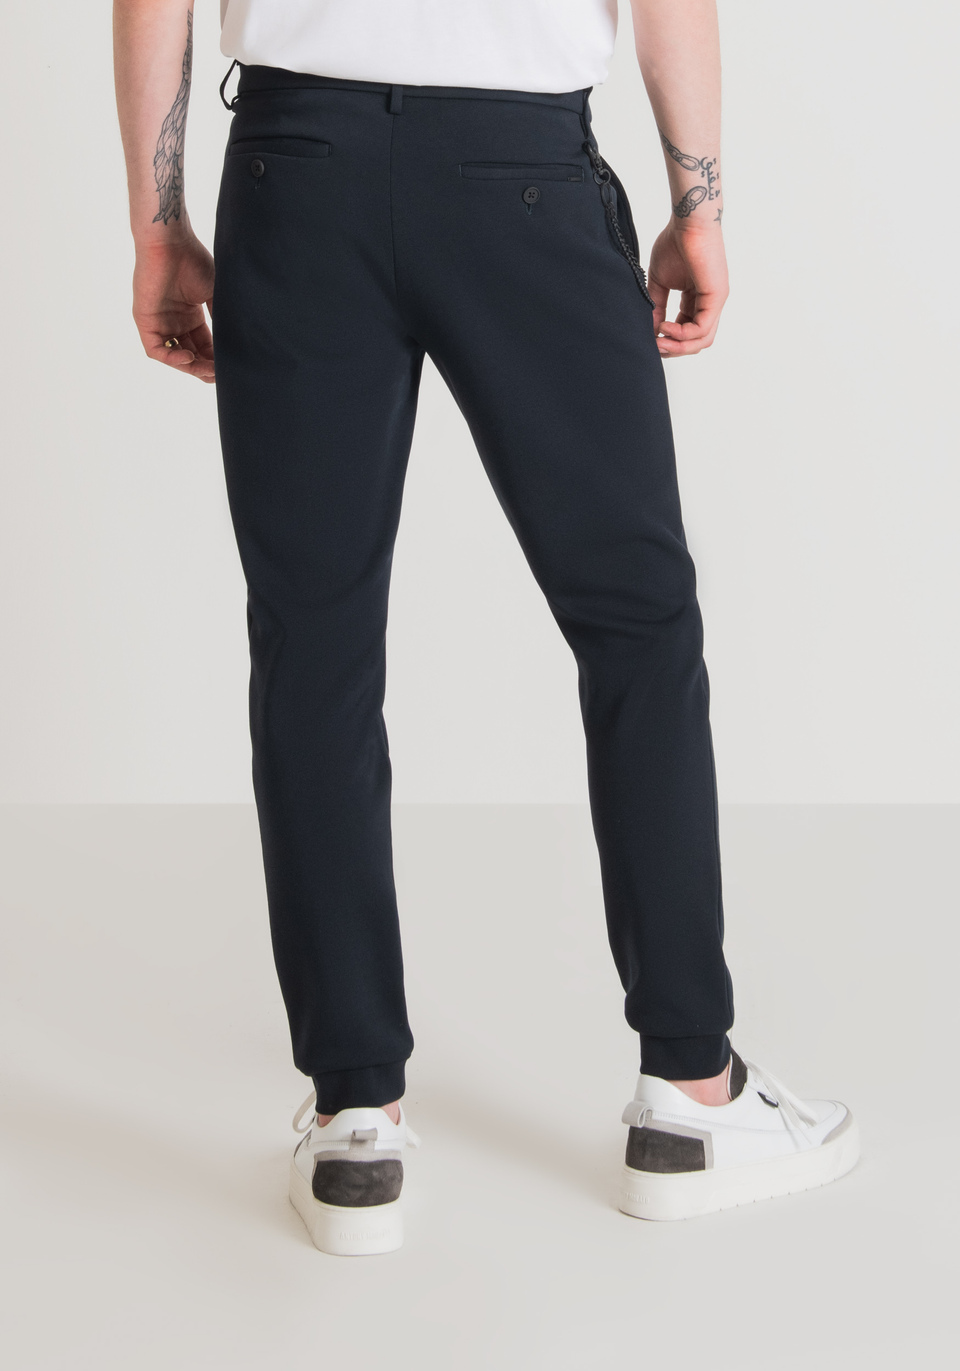 SKINNY FIT SWEATPANTS IN COTTON BLEND WITH BUTTON CLOSURE AND ELASTICATED HEM - Antony Morato Online Shop